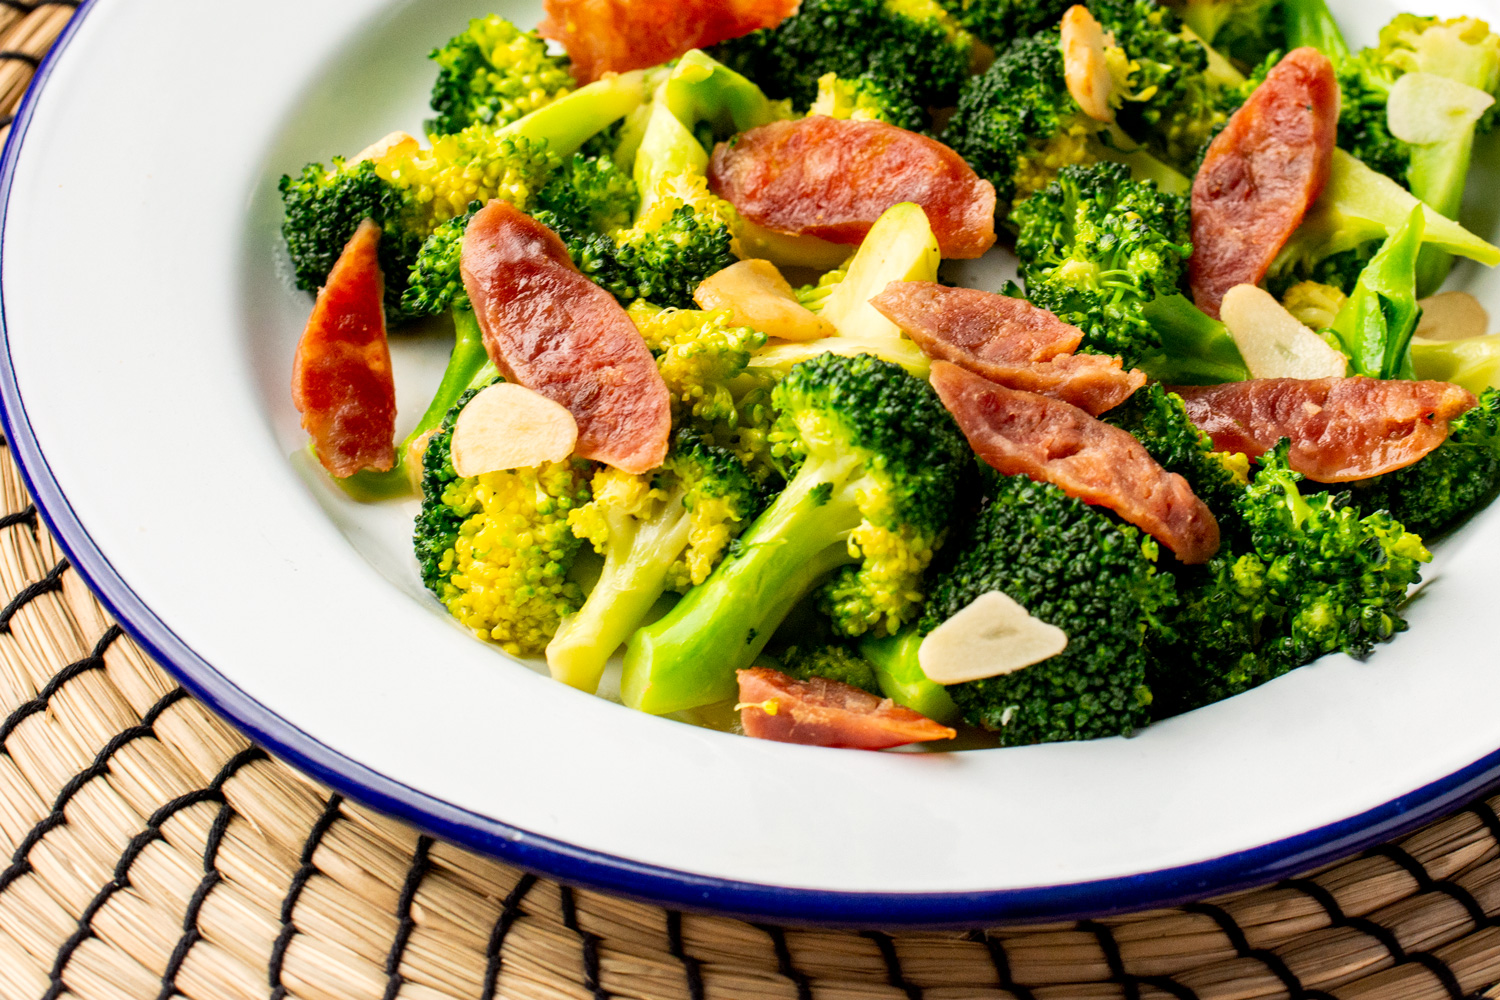 Stir Fry Broccoli with Chinese Sausage | Asian Inspirations